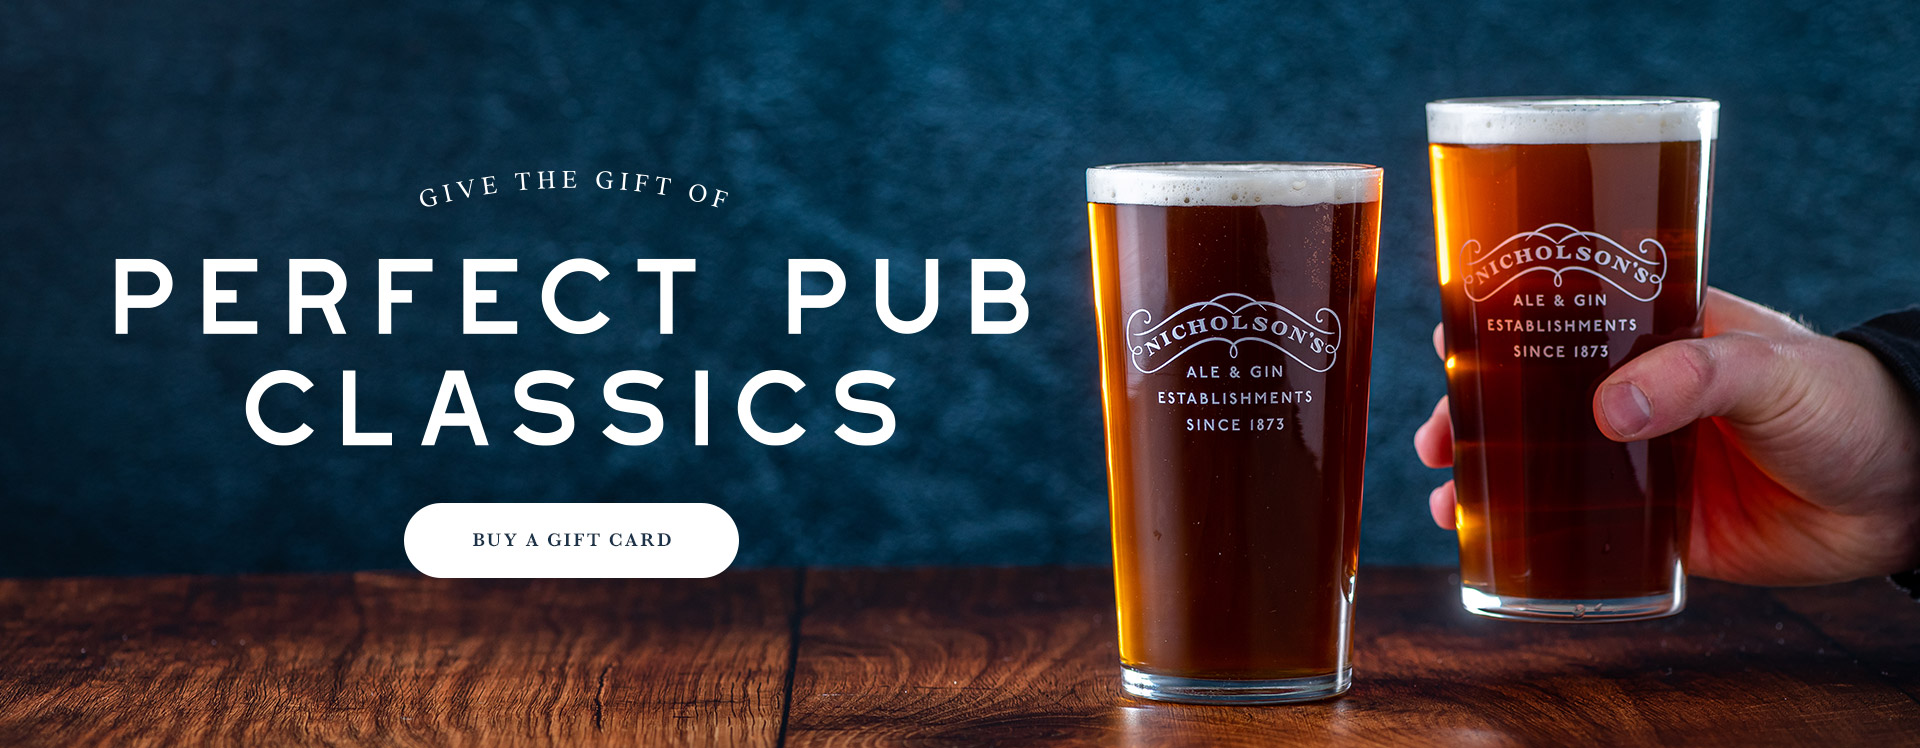 Nicholson’s Pub Gift Voucher at The Sugar Loaf in London